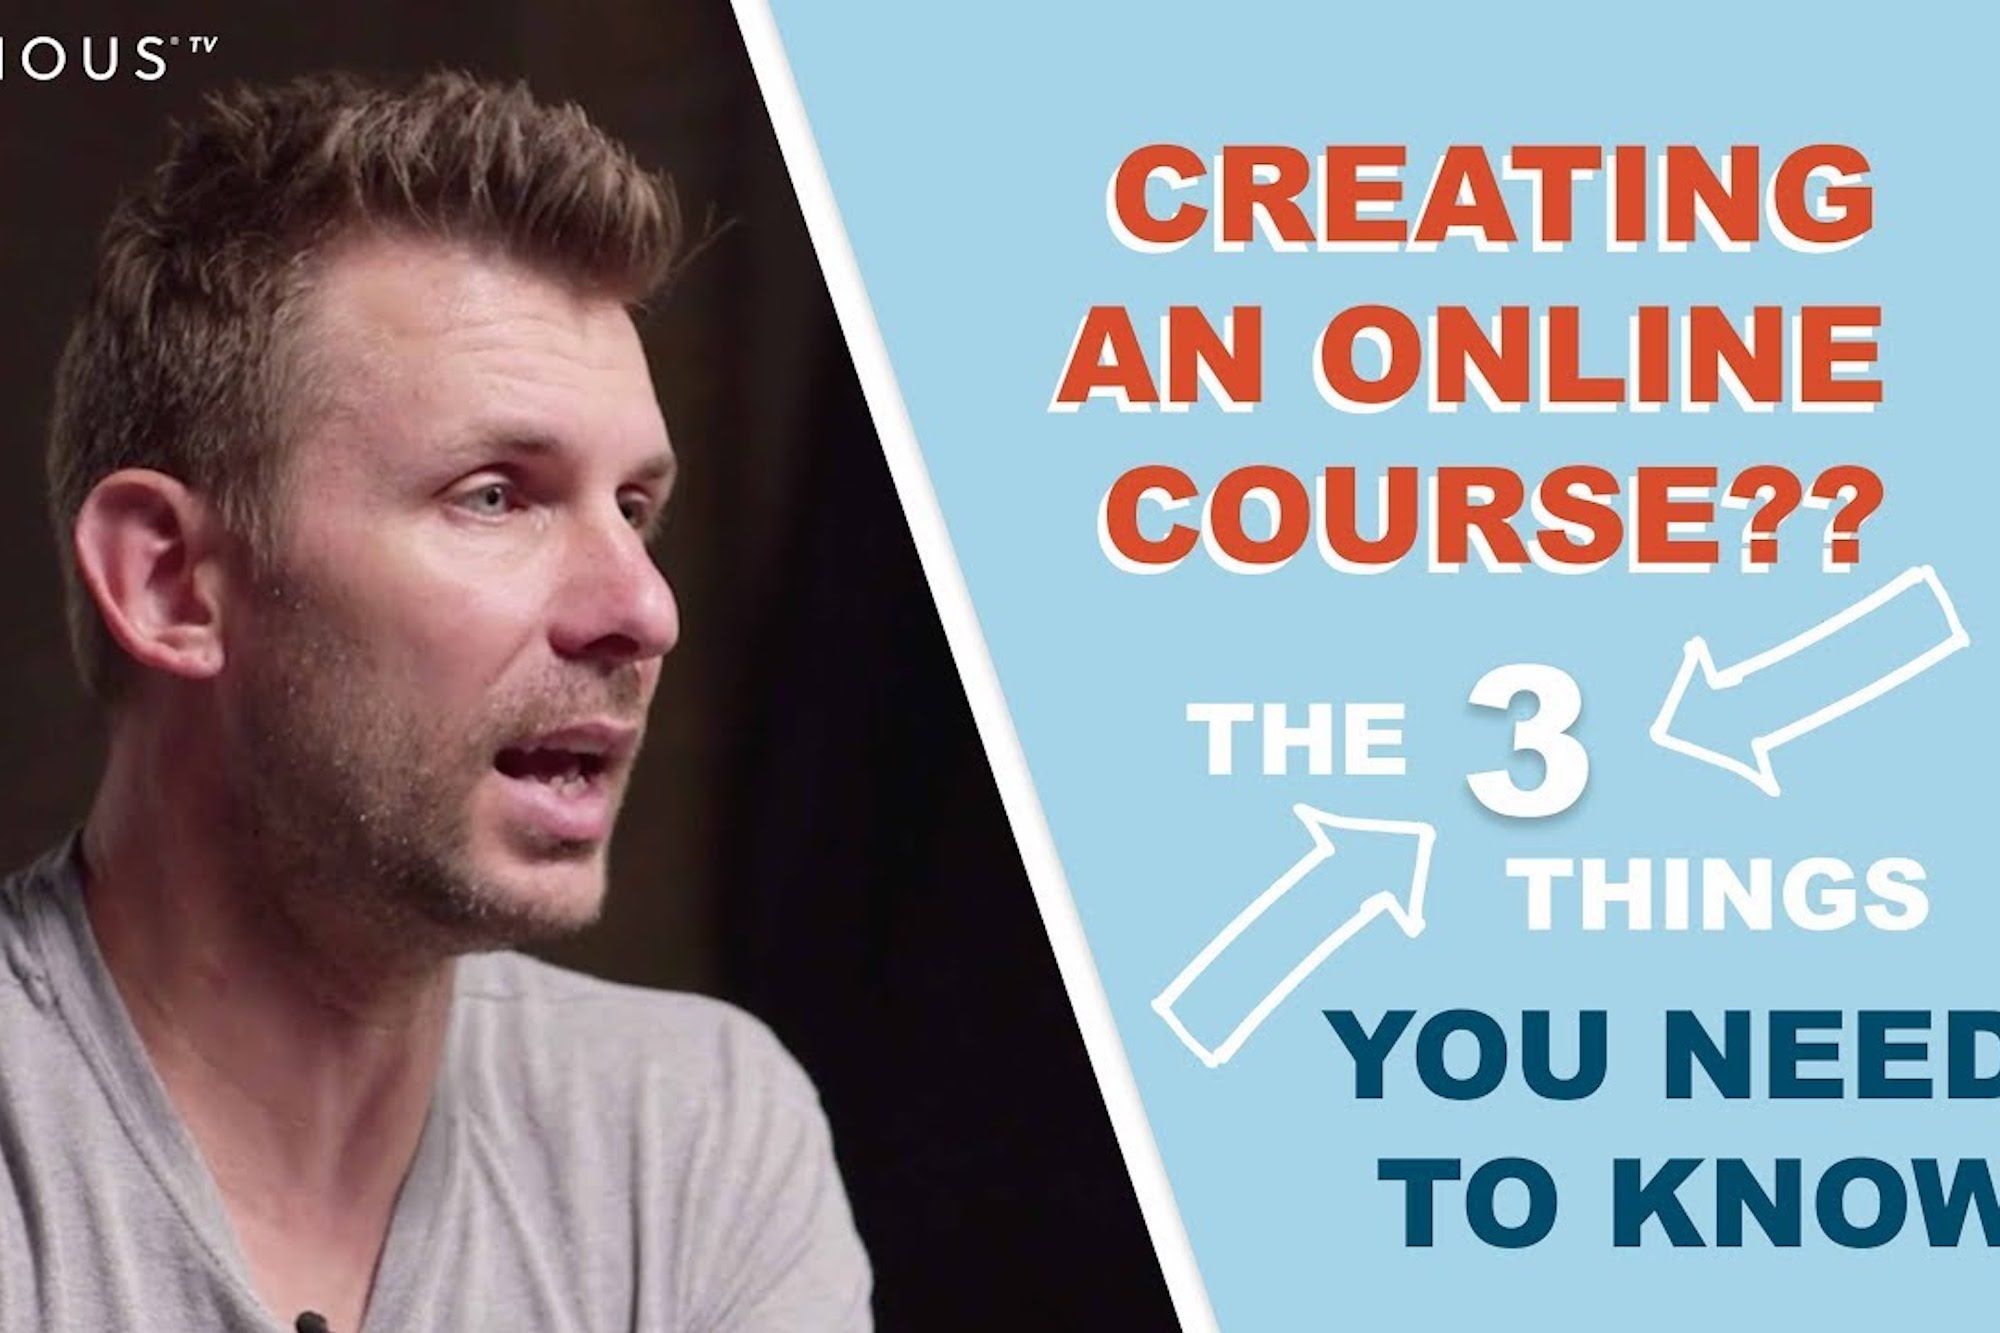 How to Create an Online Course for an Engaged Audience